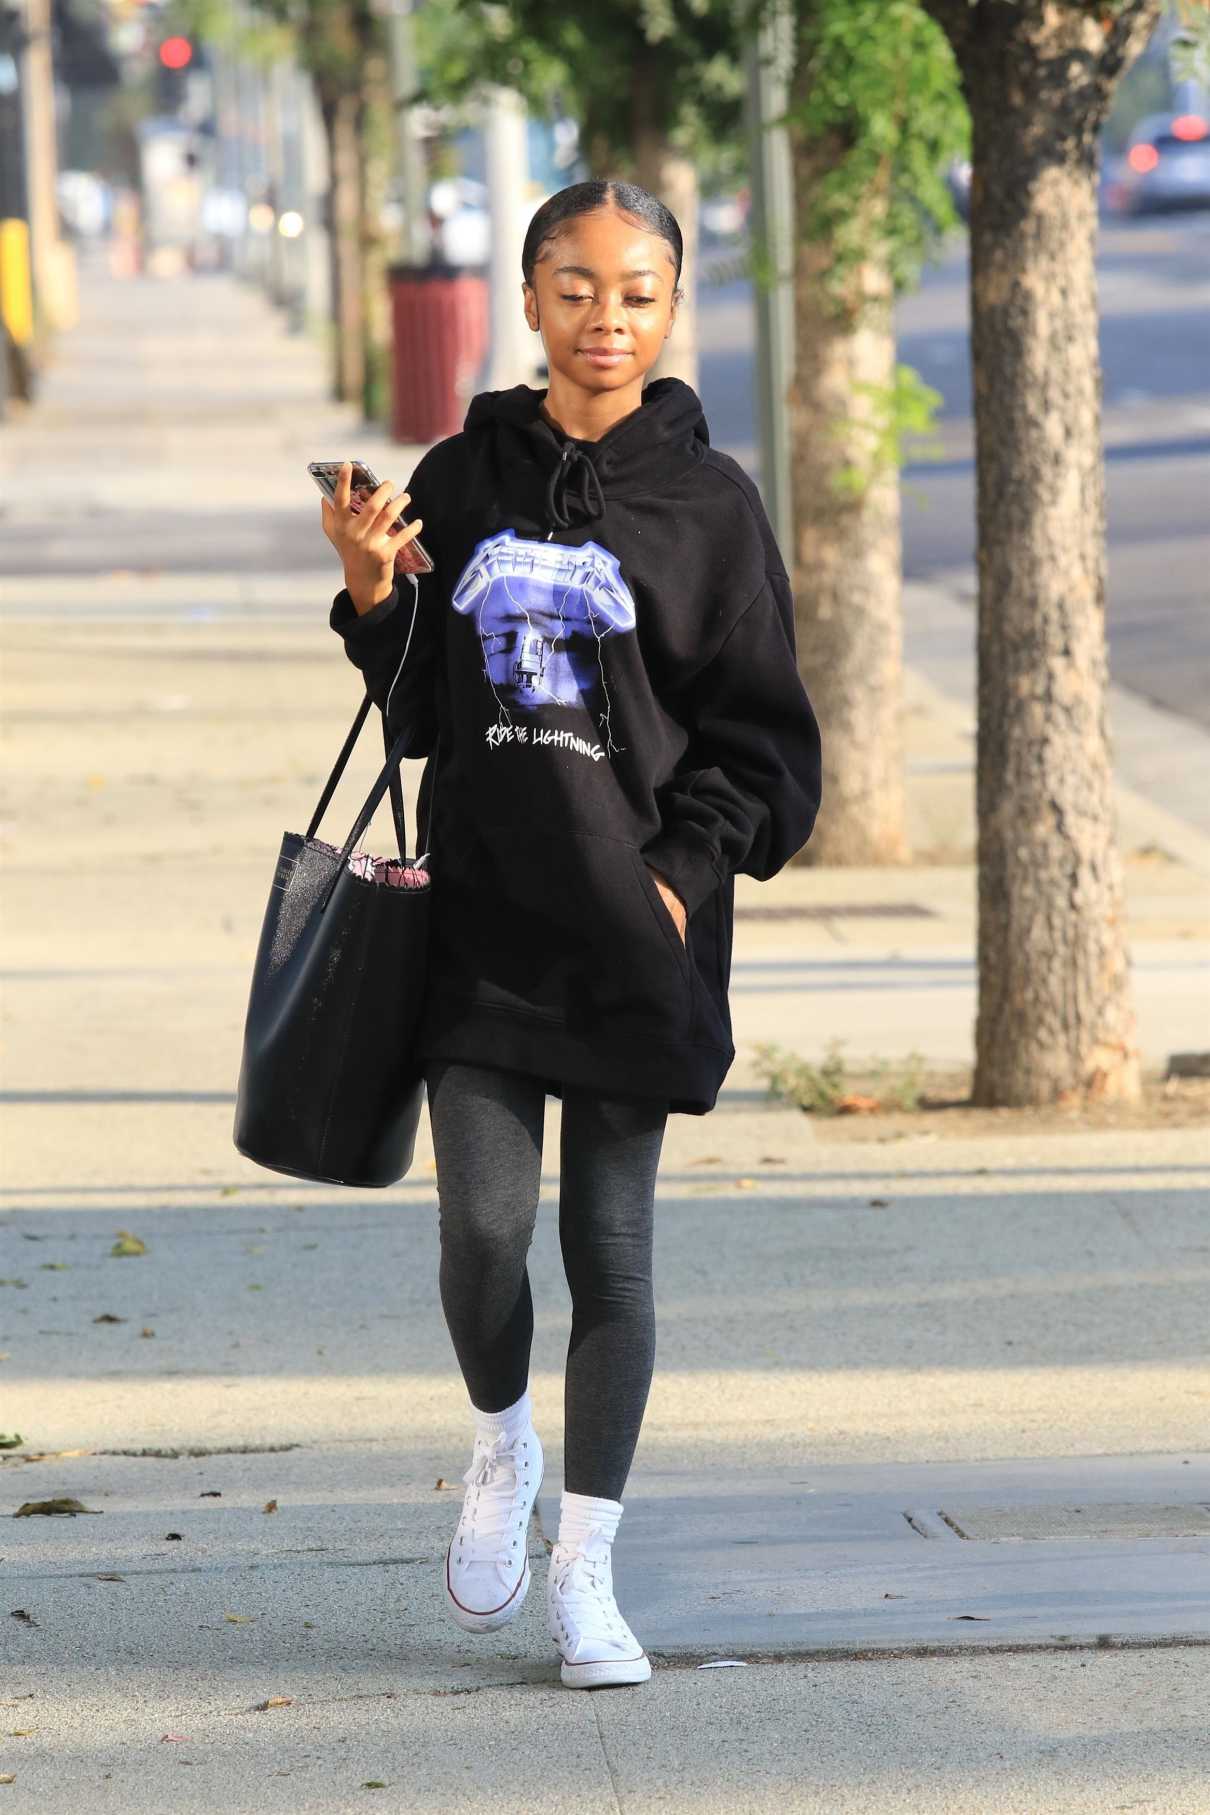 Skai Jackson in a Black Hoody Arrives at the DWTS Studio in Los Angeles ...